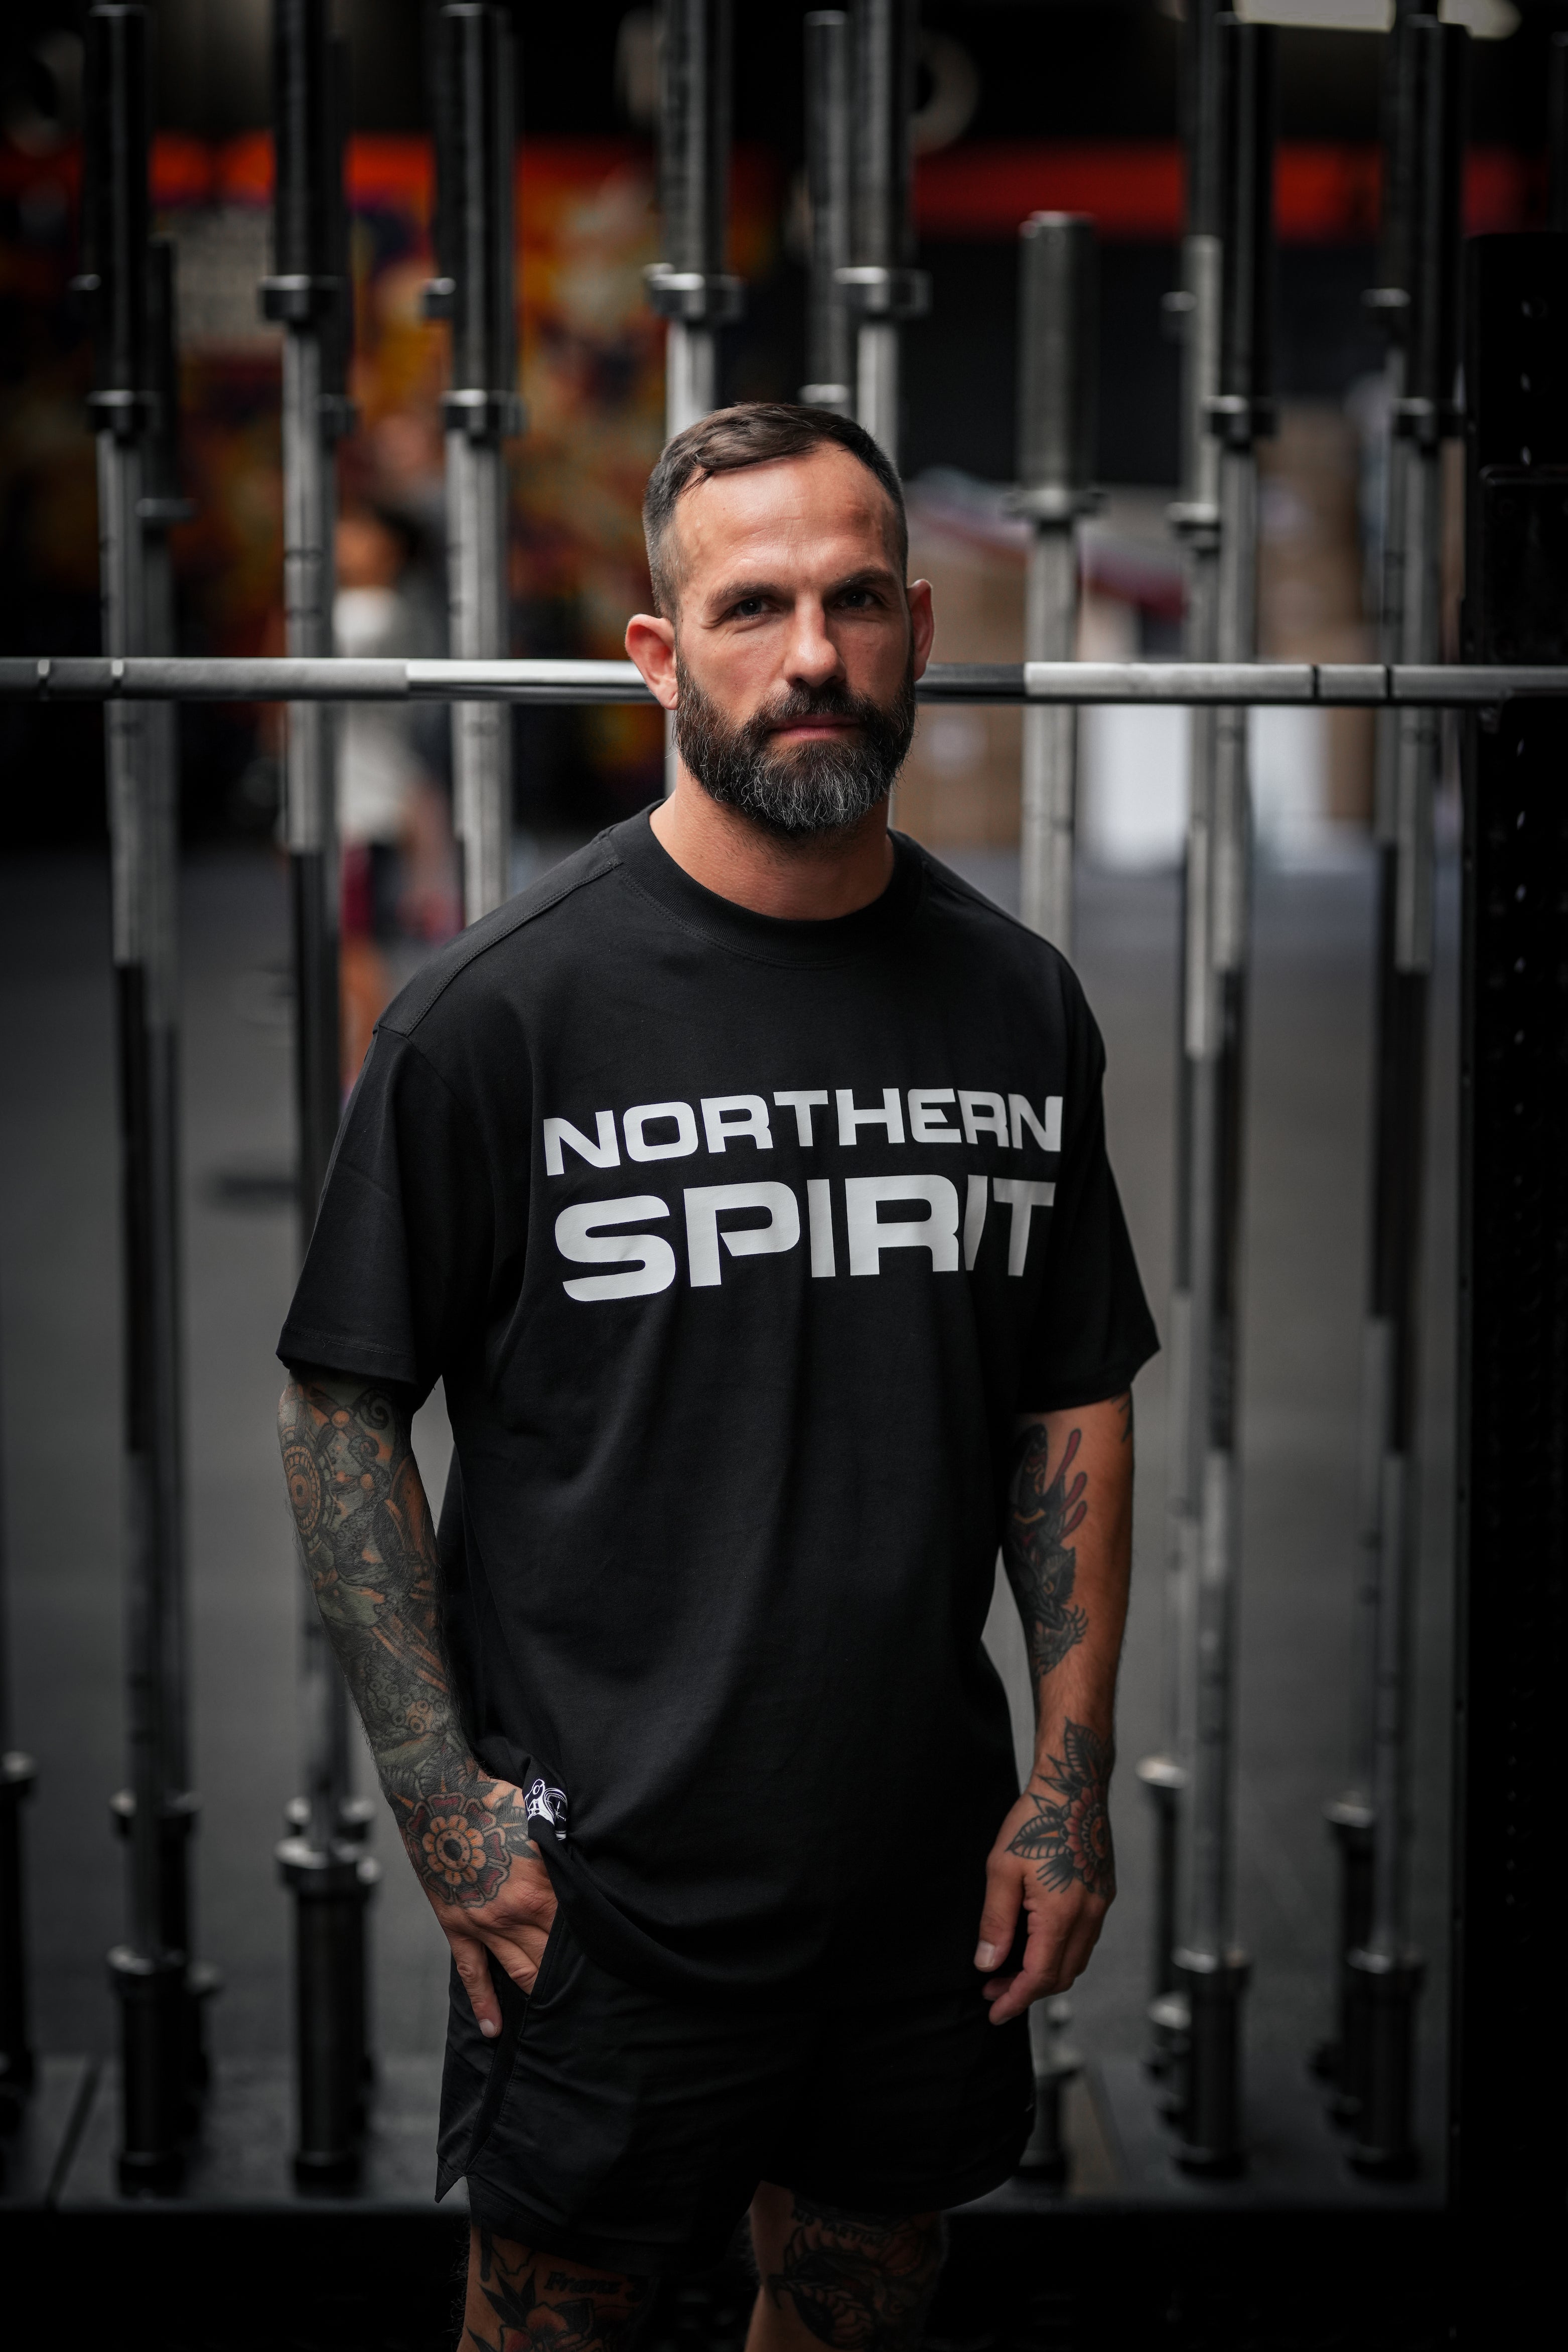 BY SPORT KEEP THE NORTH - BSKN - northern spirit - crossfit - shooting - oversize t-shirt - functional training & fitness clothing brand - Tagline - Crossfit community - 